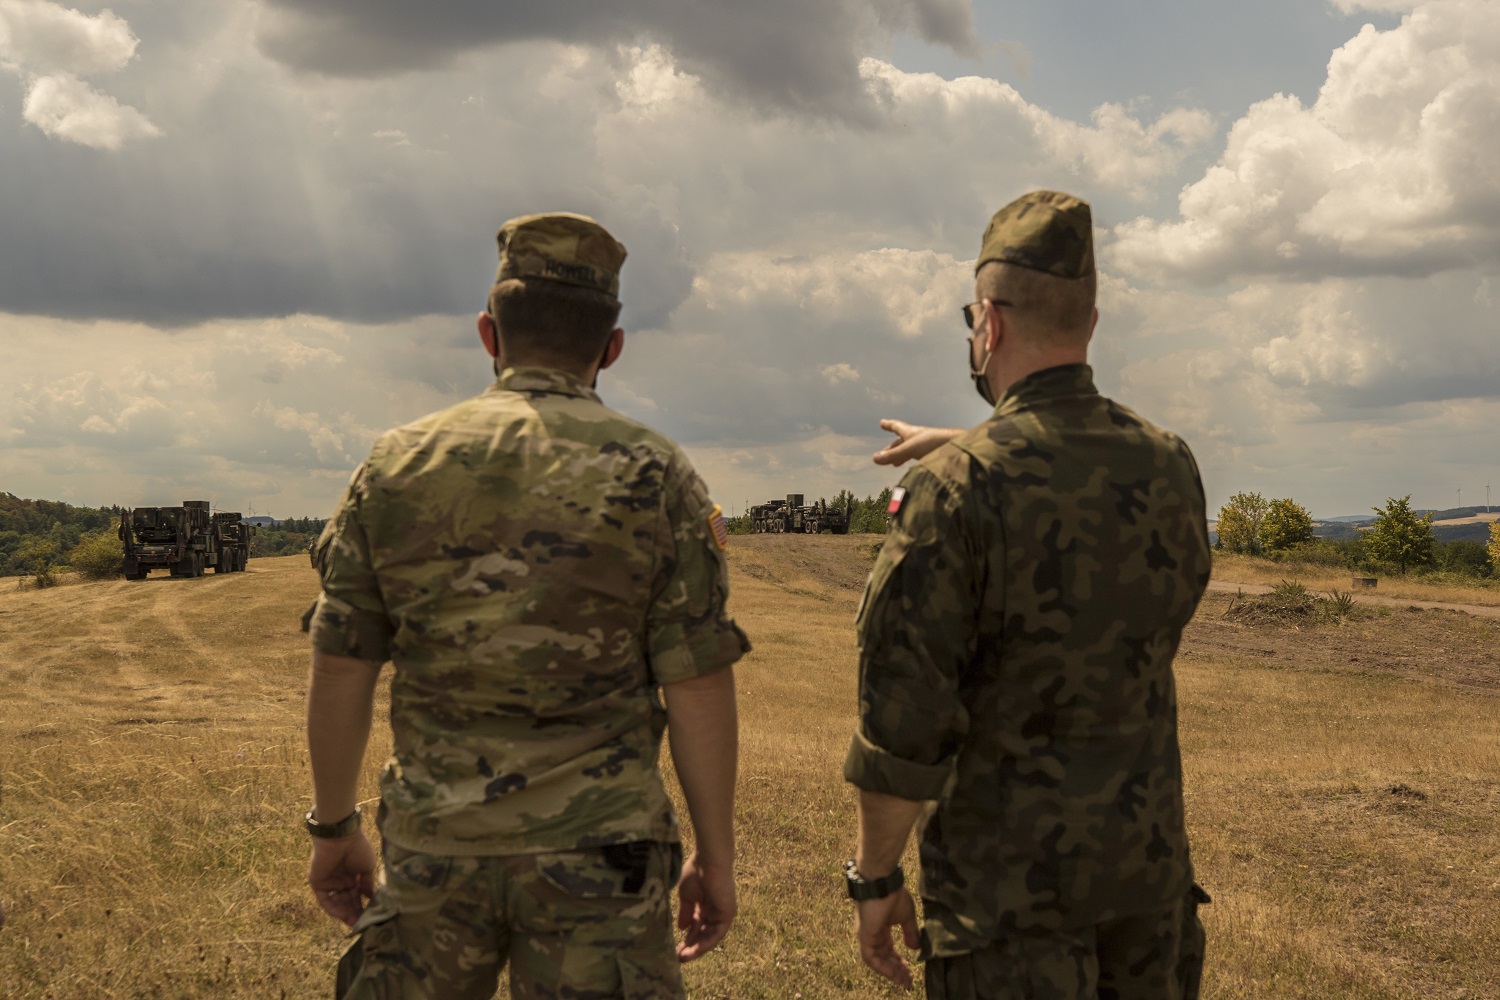 A Polish delegation, assigned to the 37th Air Defense Squadron, visits with U.S. Soldiers assigned to the 10th Army Air and Missile Defense Command on August 4, 2020 in Baumholder, Germany. 